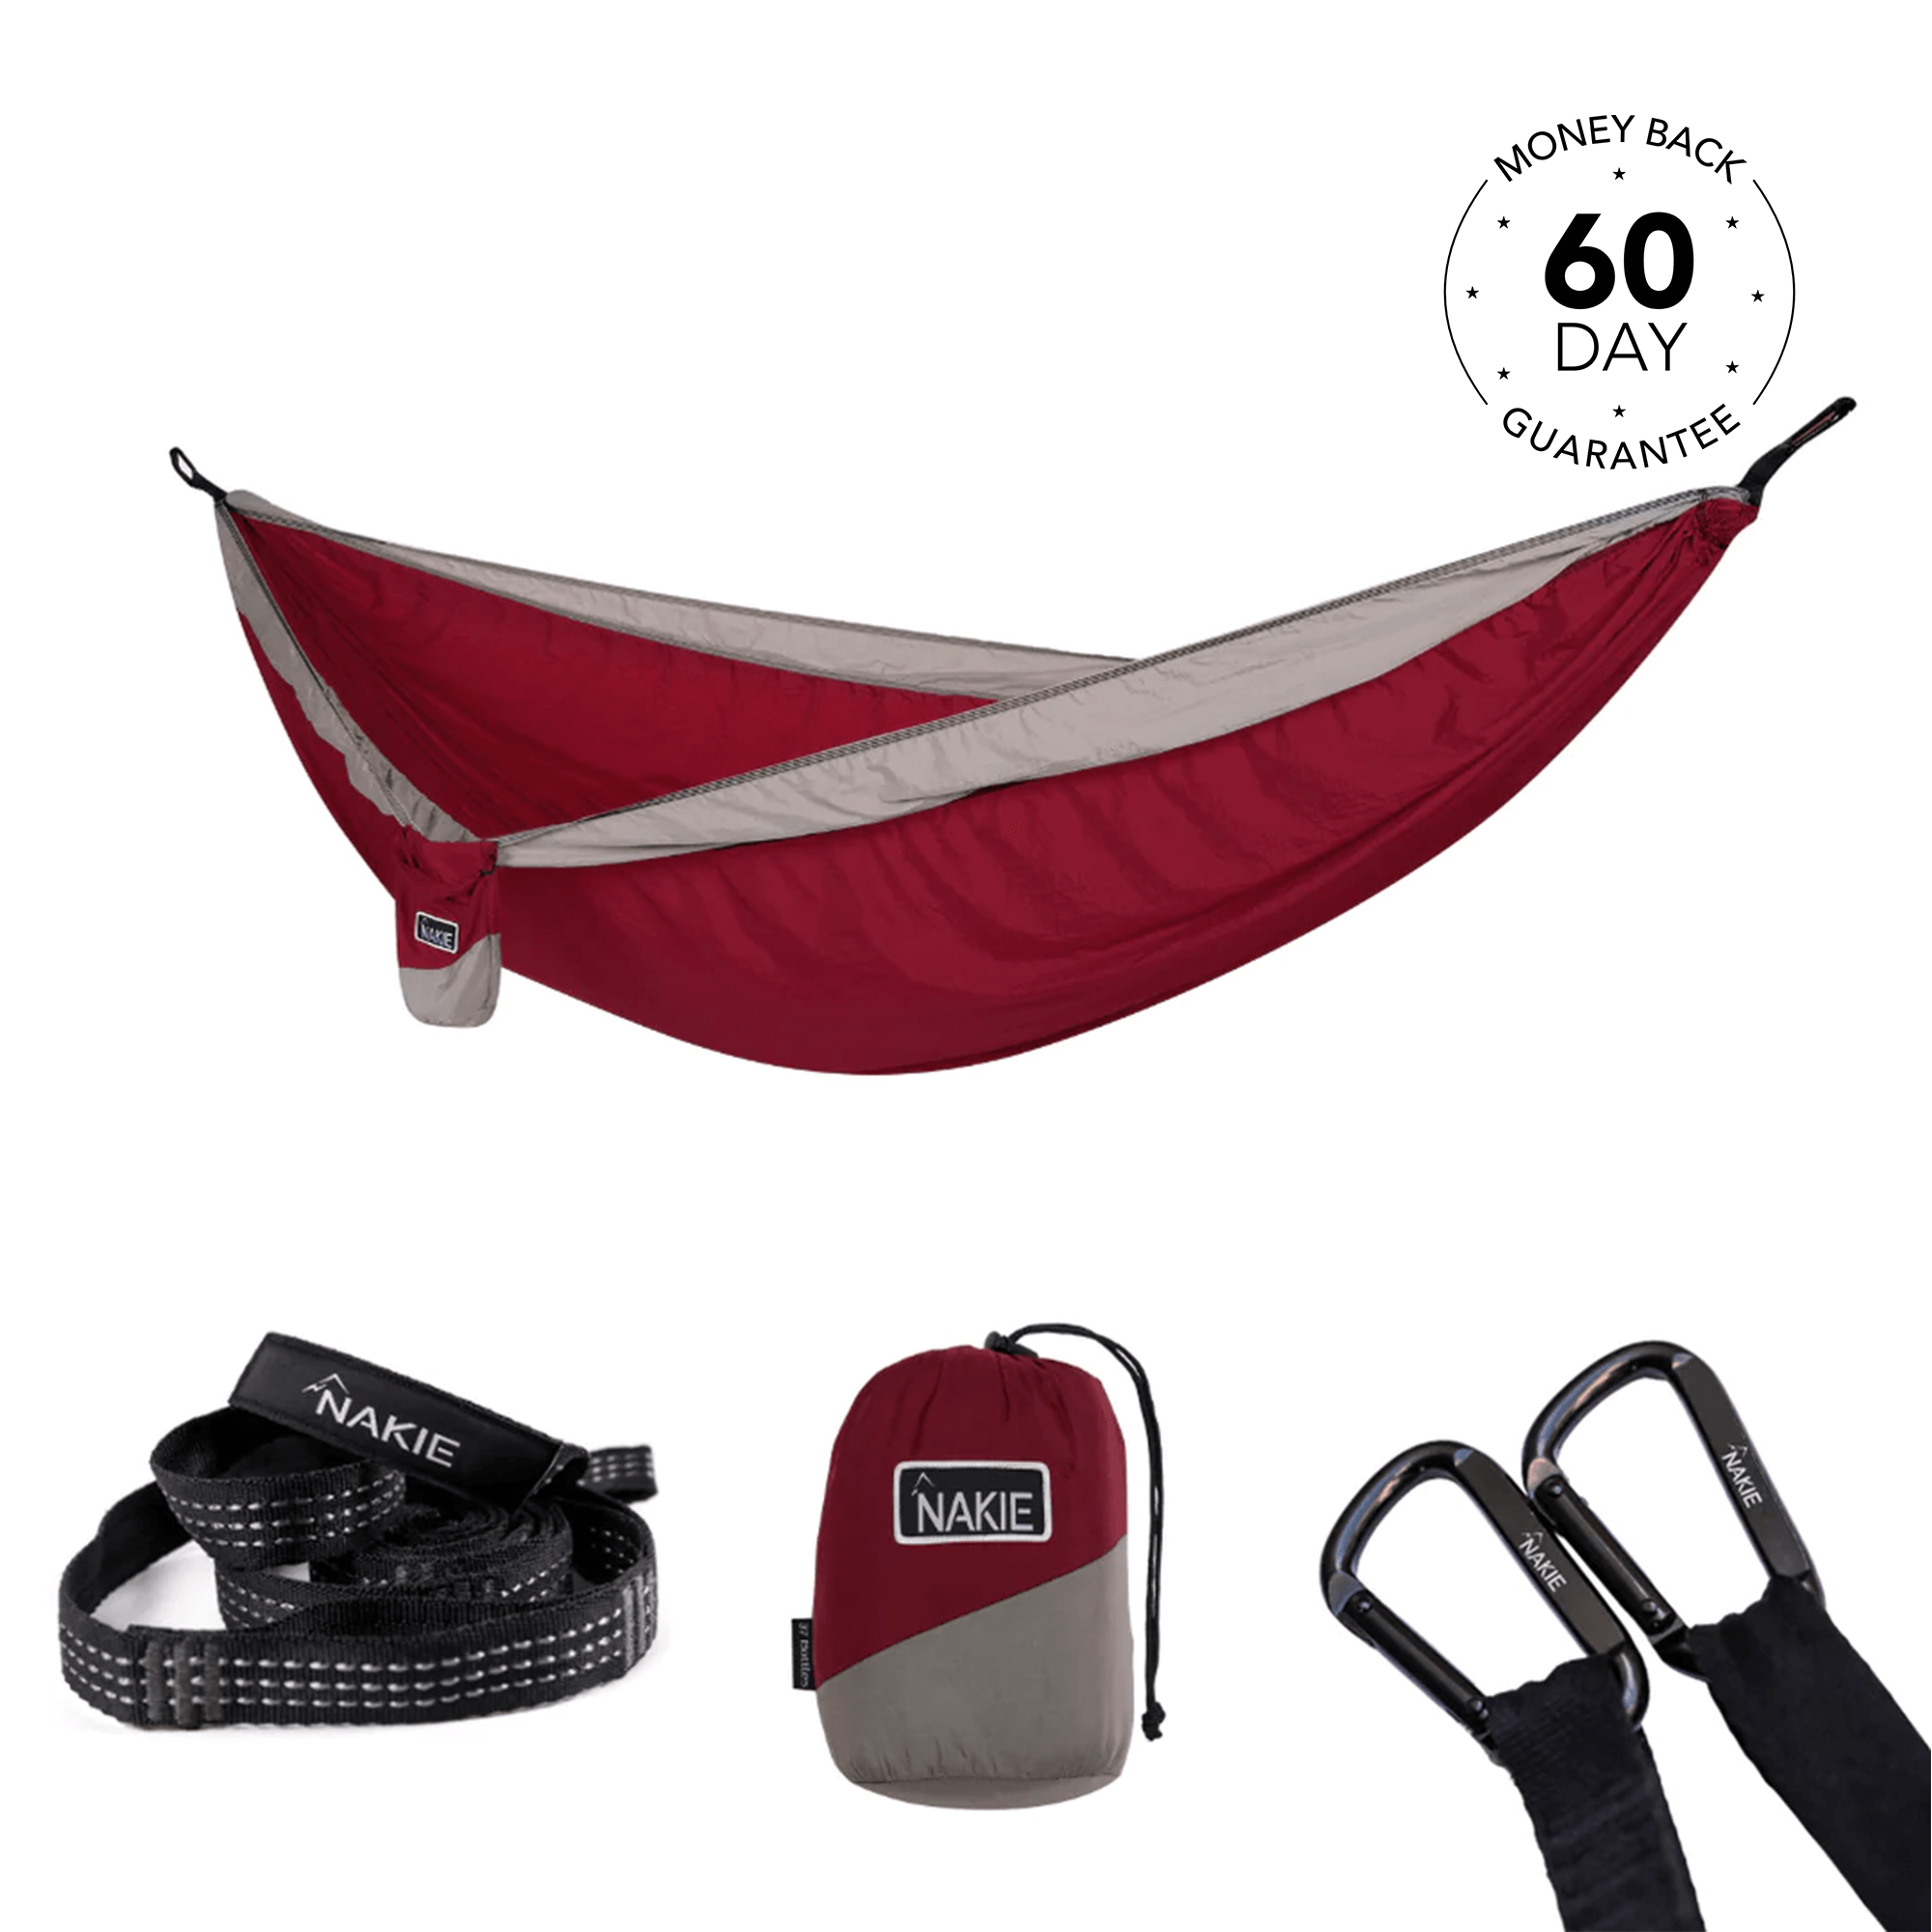 Merlot Red - Recycled Hammock with Straps